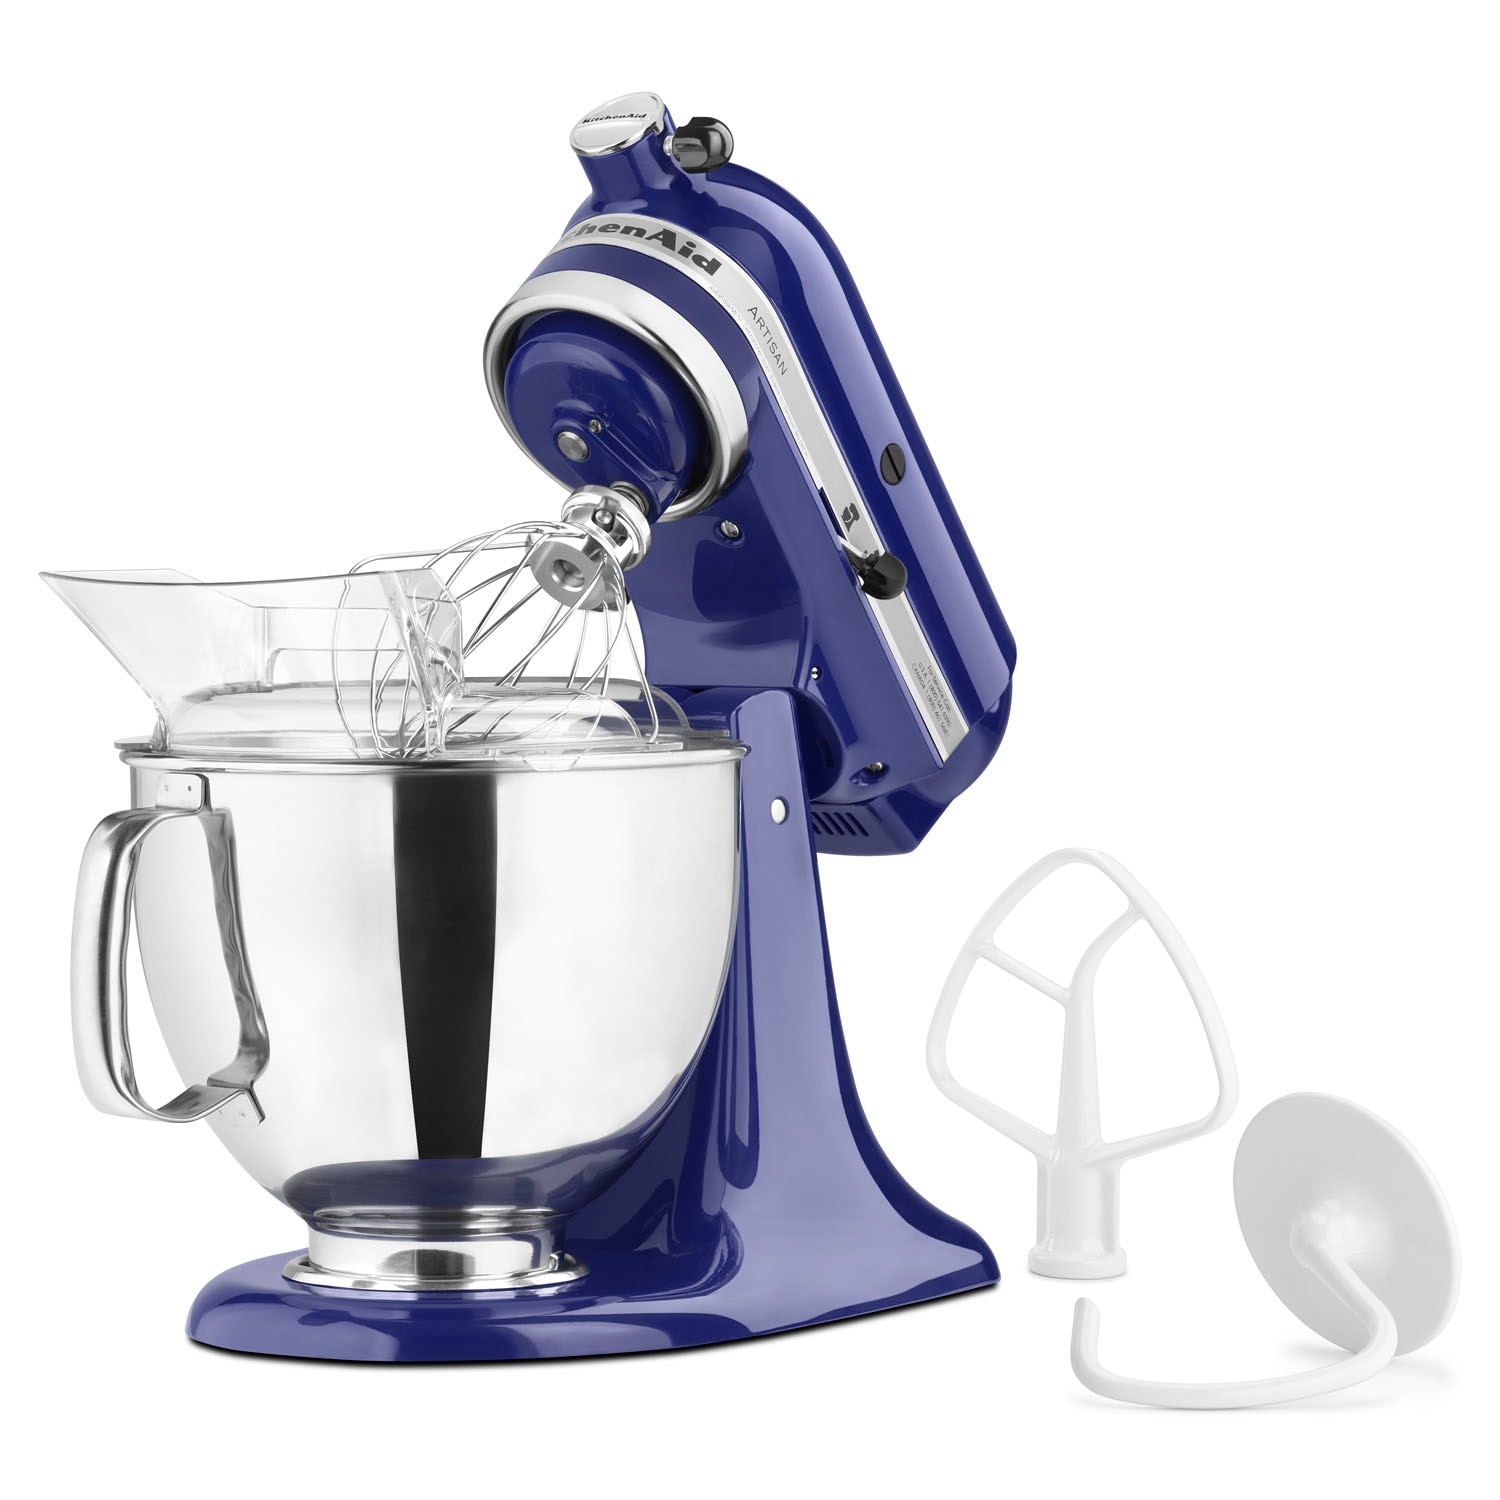 Precision Master 5.5 Qt. 12-Speed Artic Blue Stand Mixer with Attachments